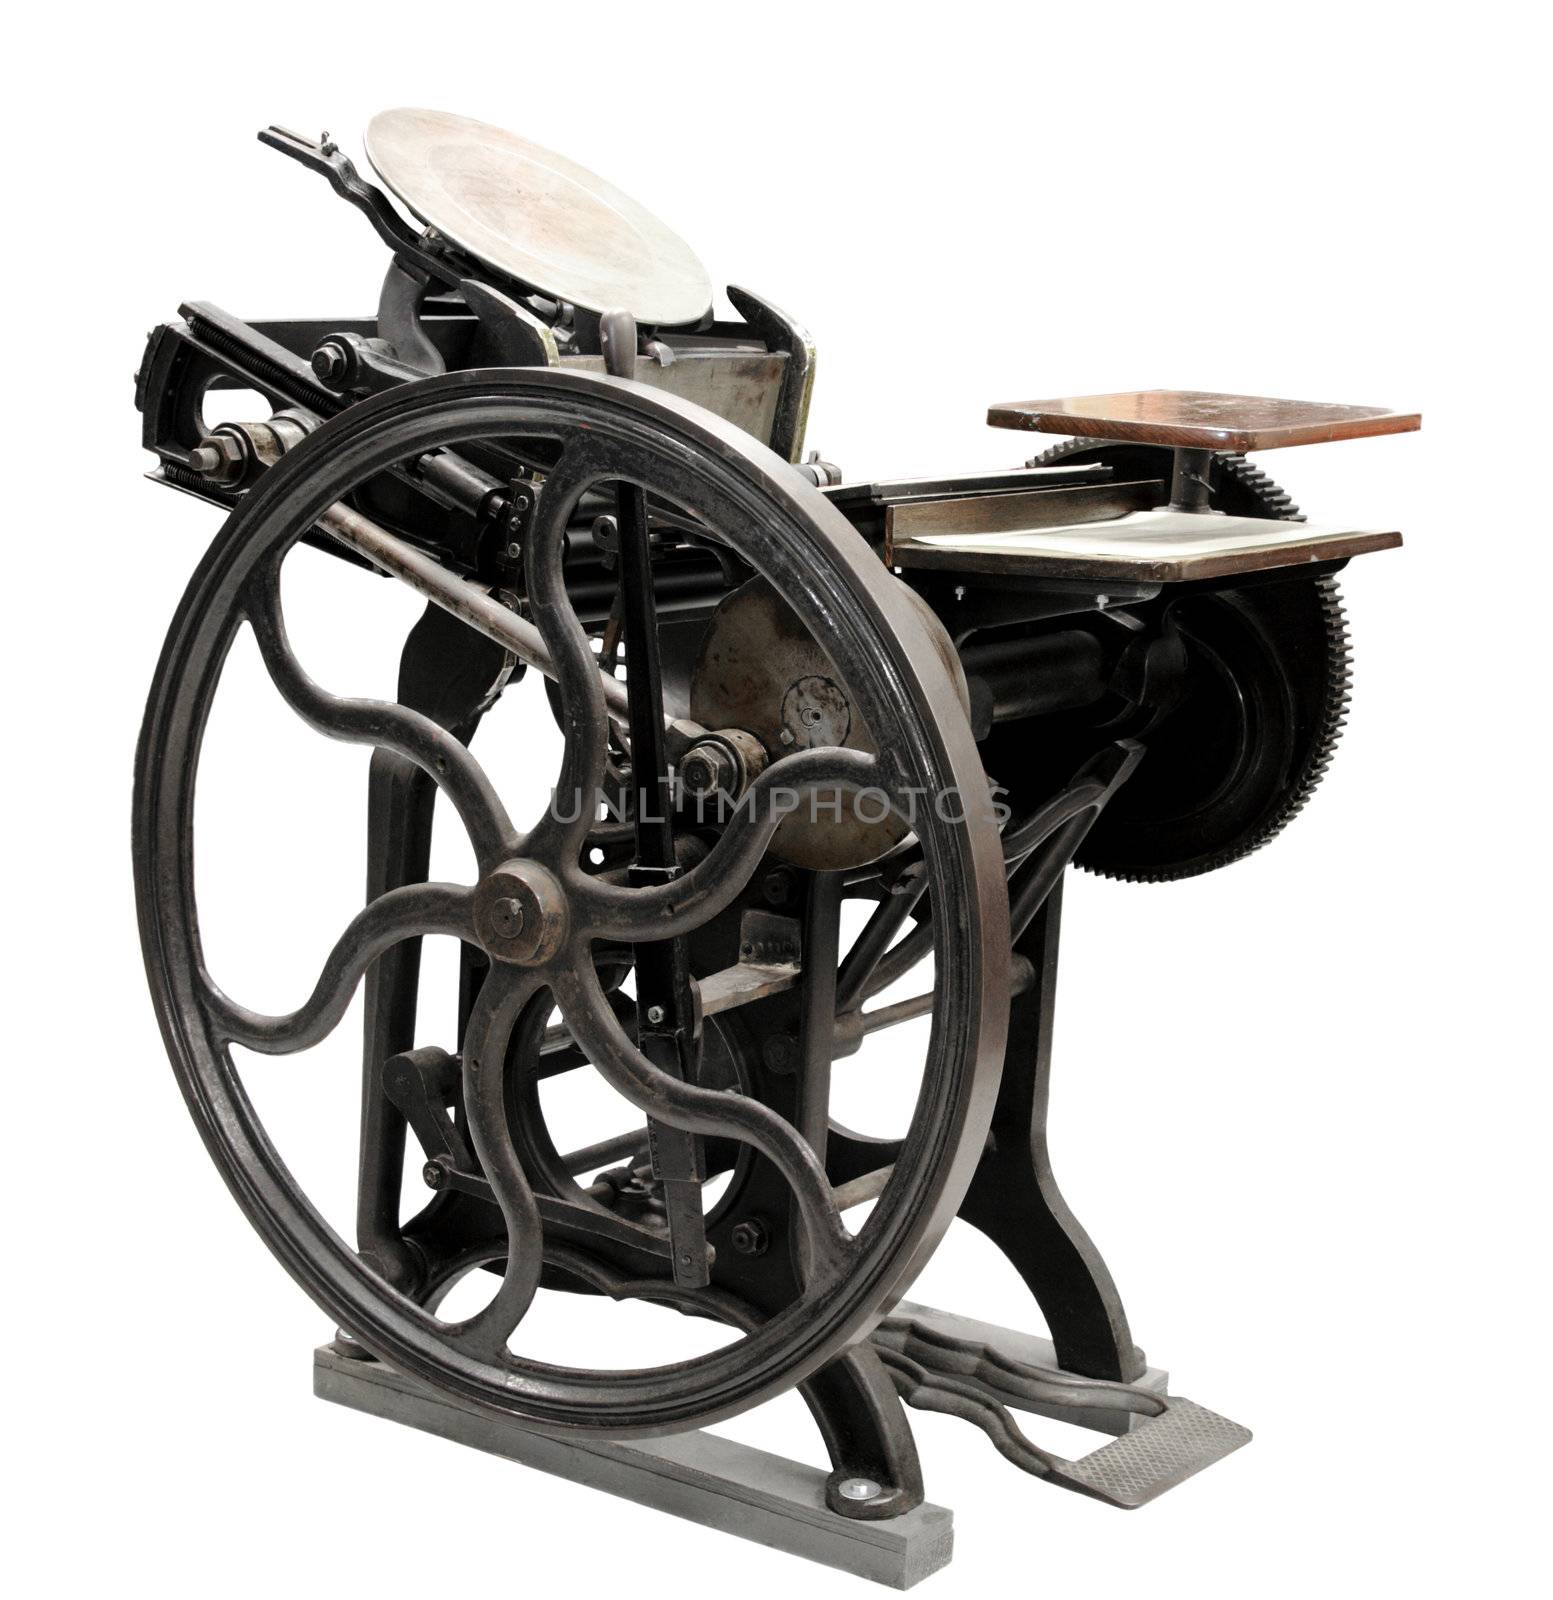 letterpress from 1888 restored to working condition